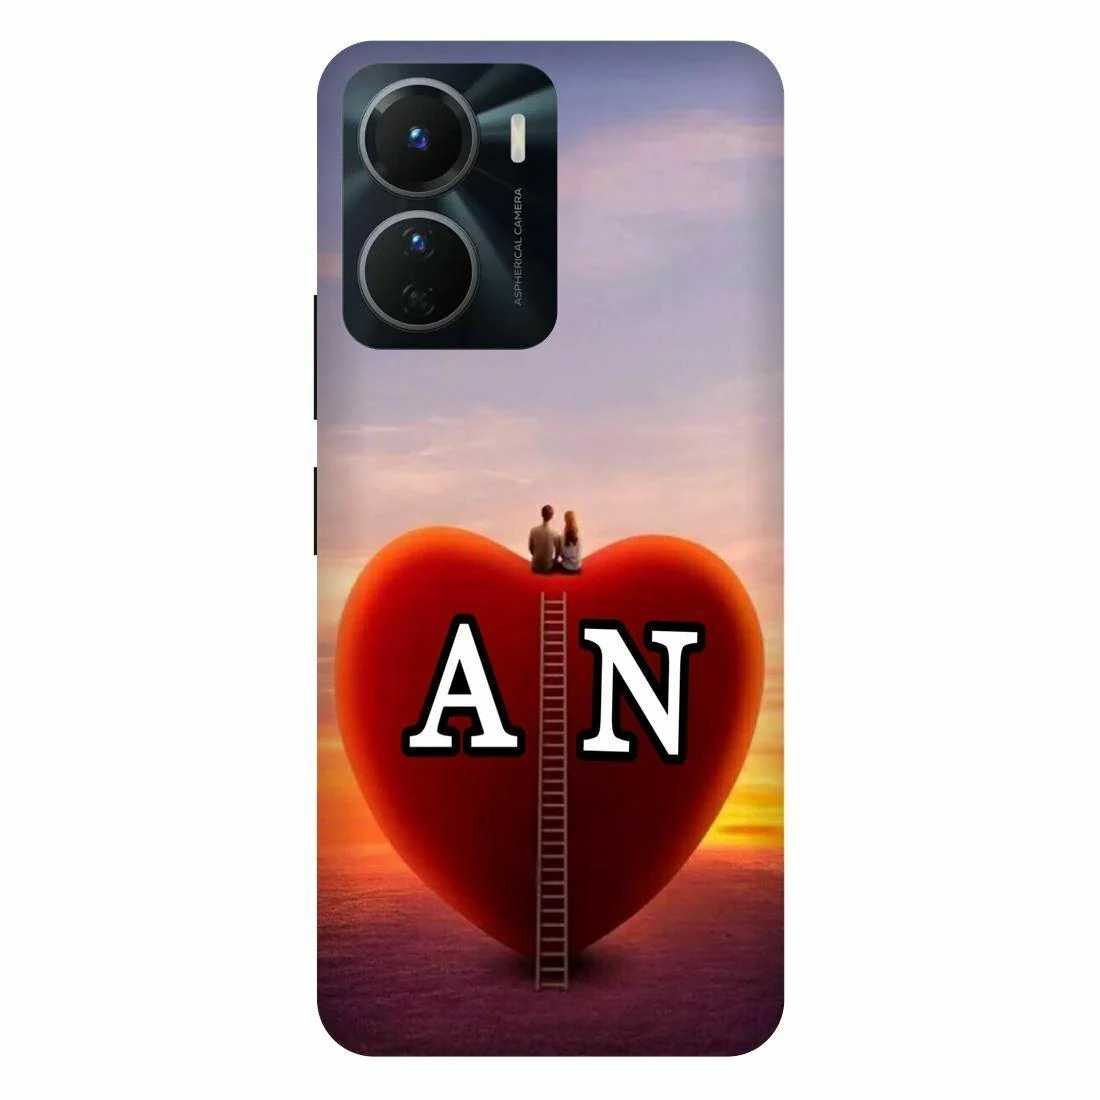 Voleano back cover for Vivo Y16, A, Love, N, letter, A, N alphabet ...